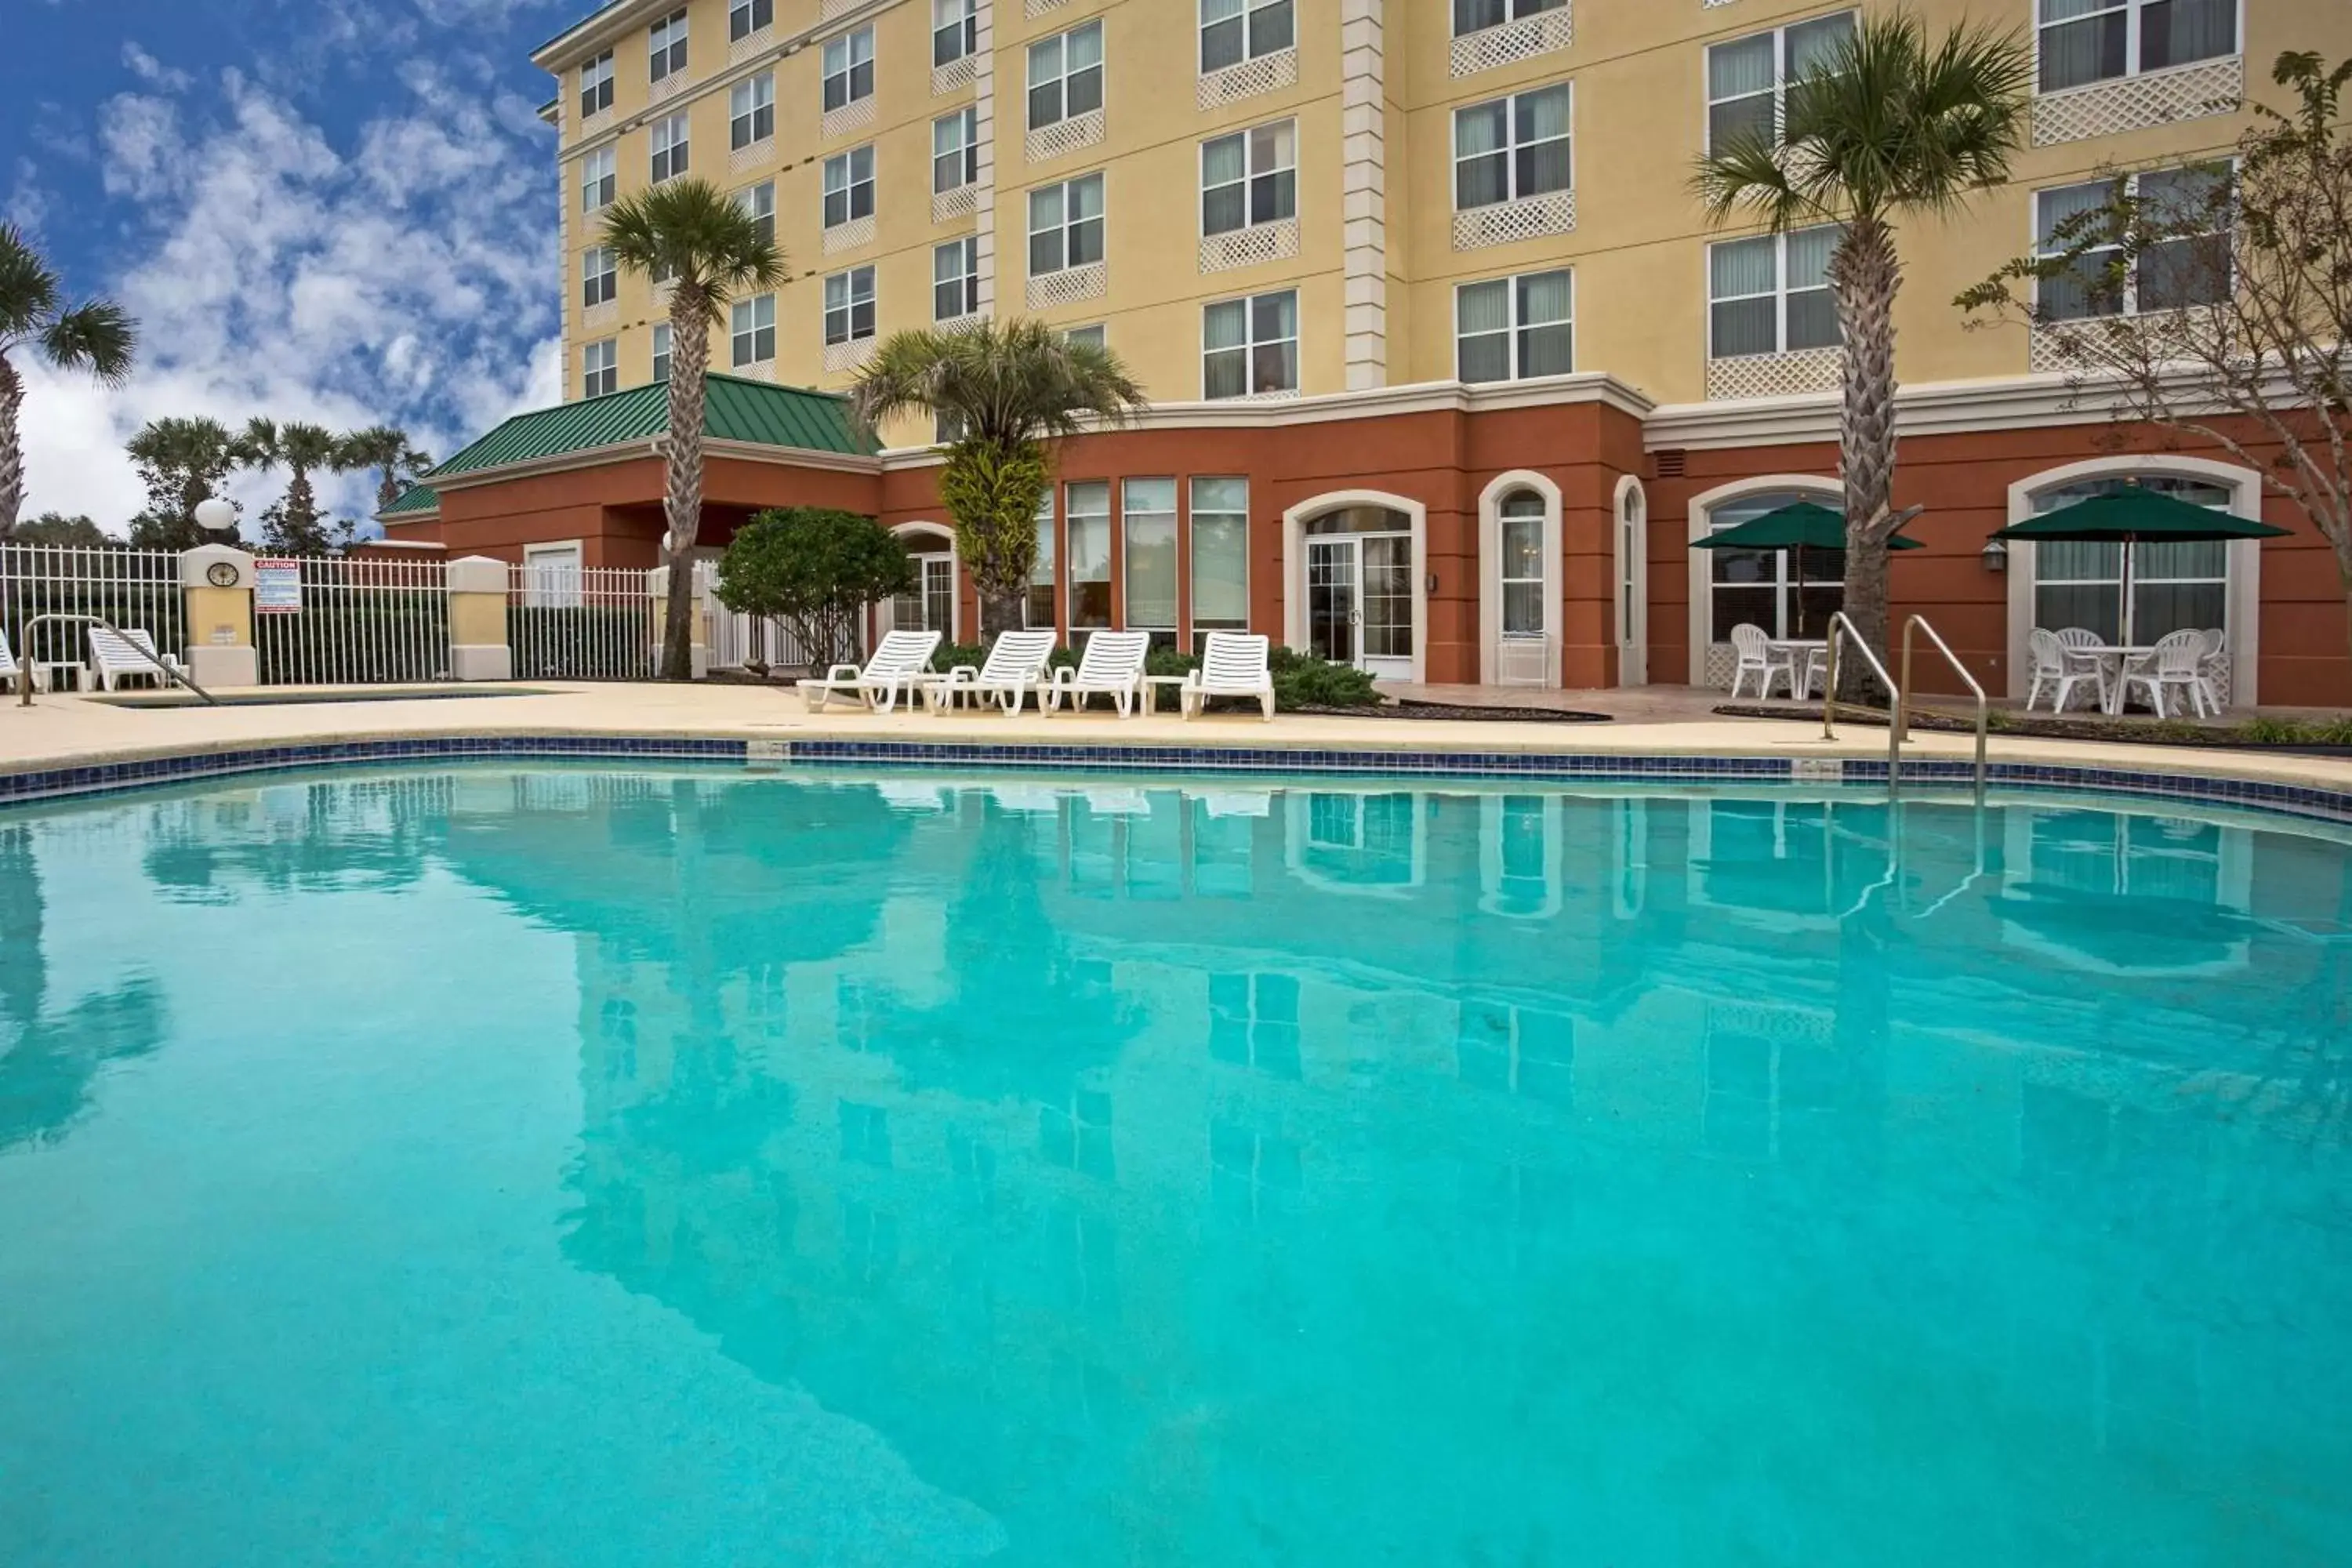 Property building in Country Inn and Suites Orlando